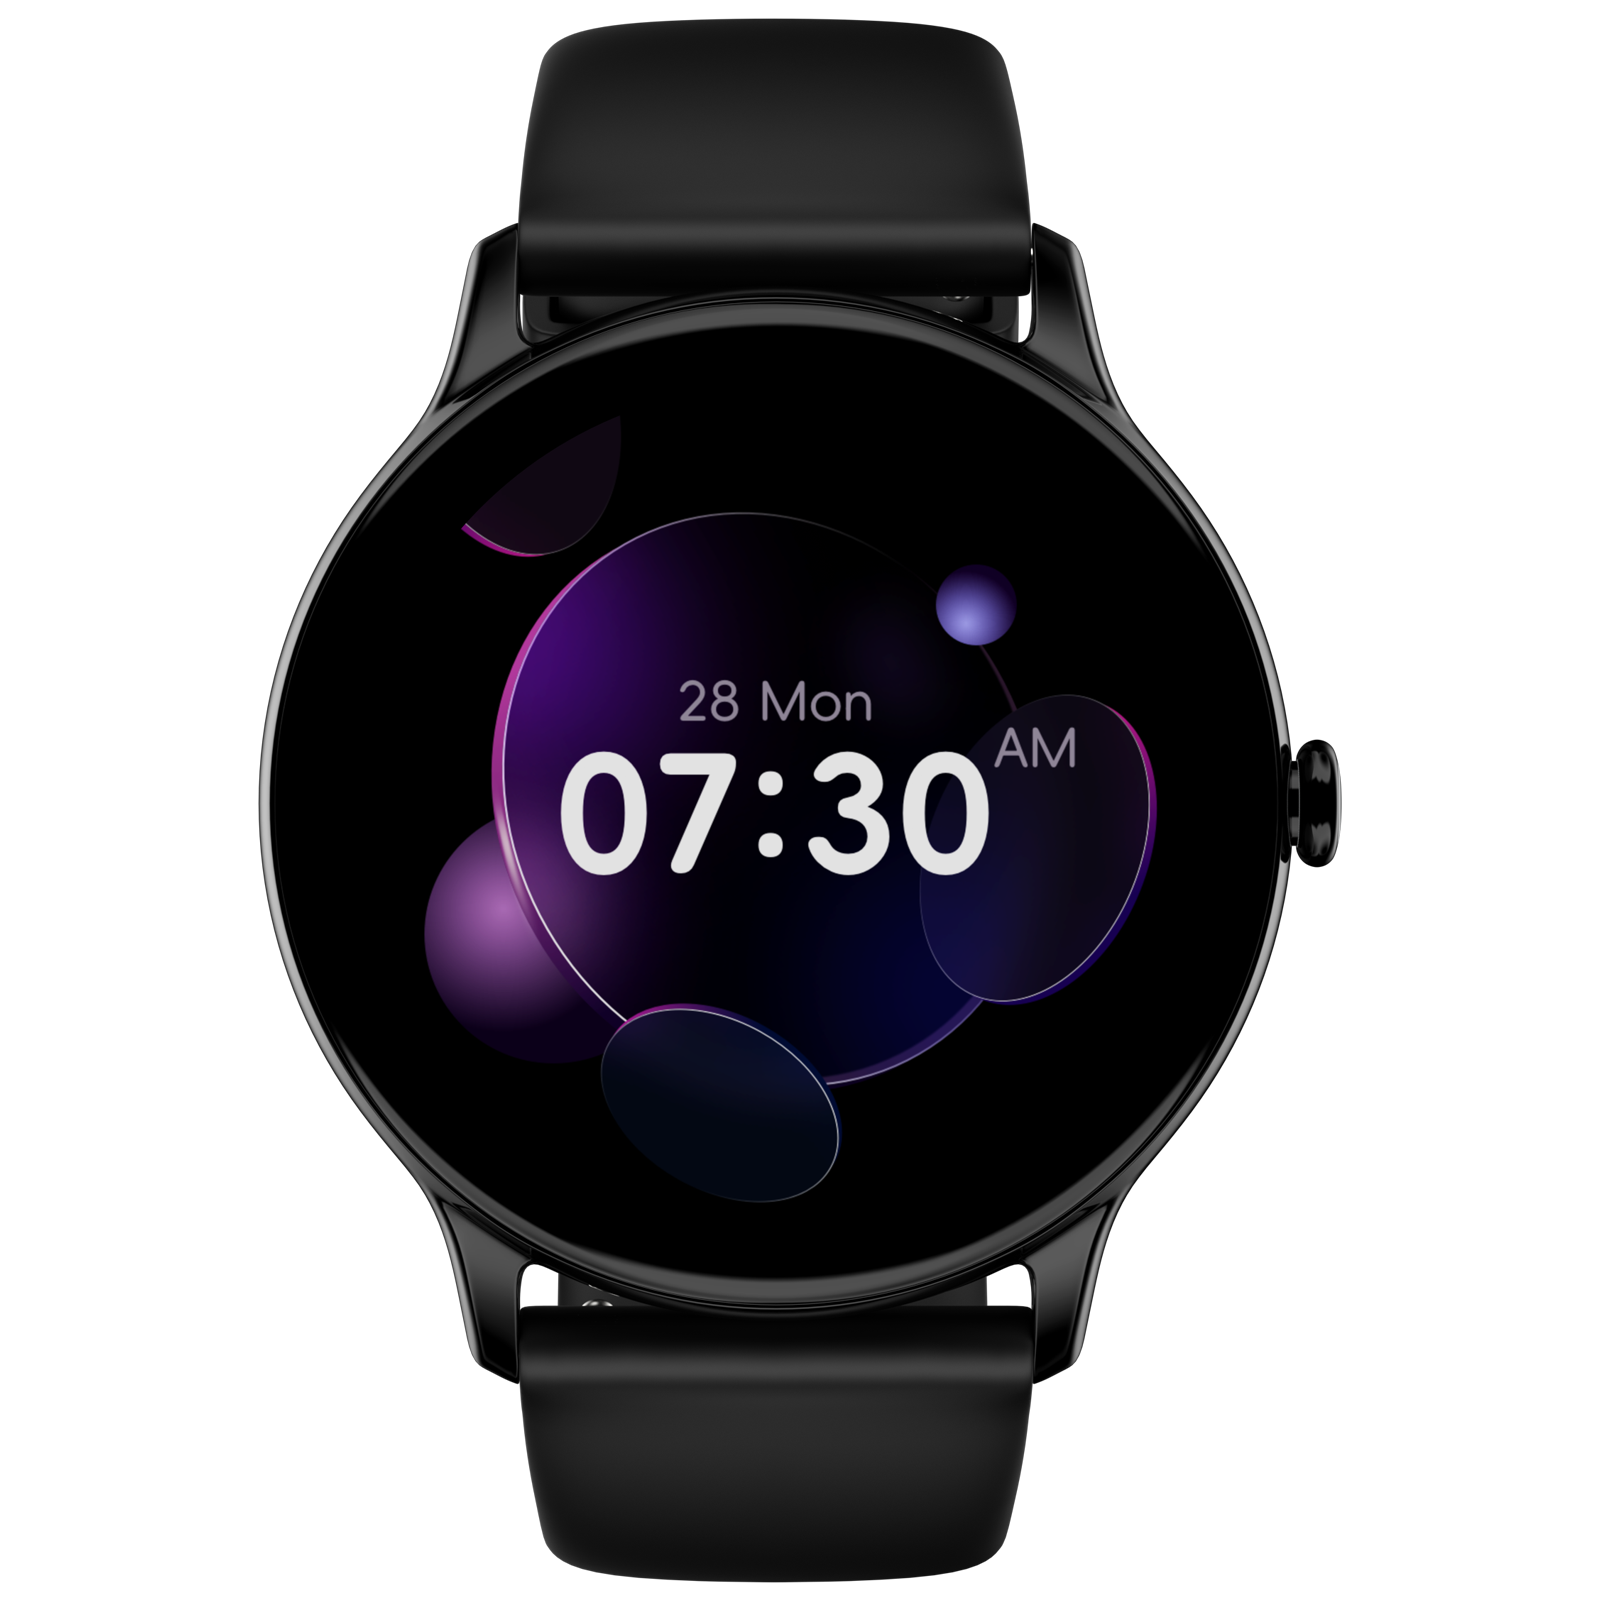 noise Twist Go Smartwatch with Bluetooth Calling (35mm TFT Display, IP67 Water Resistant, Jet Black Strap)